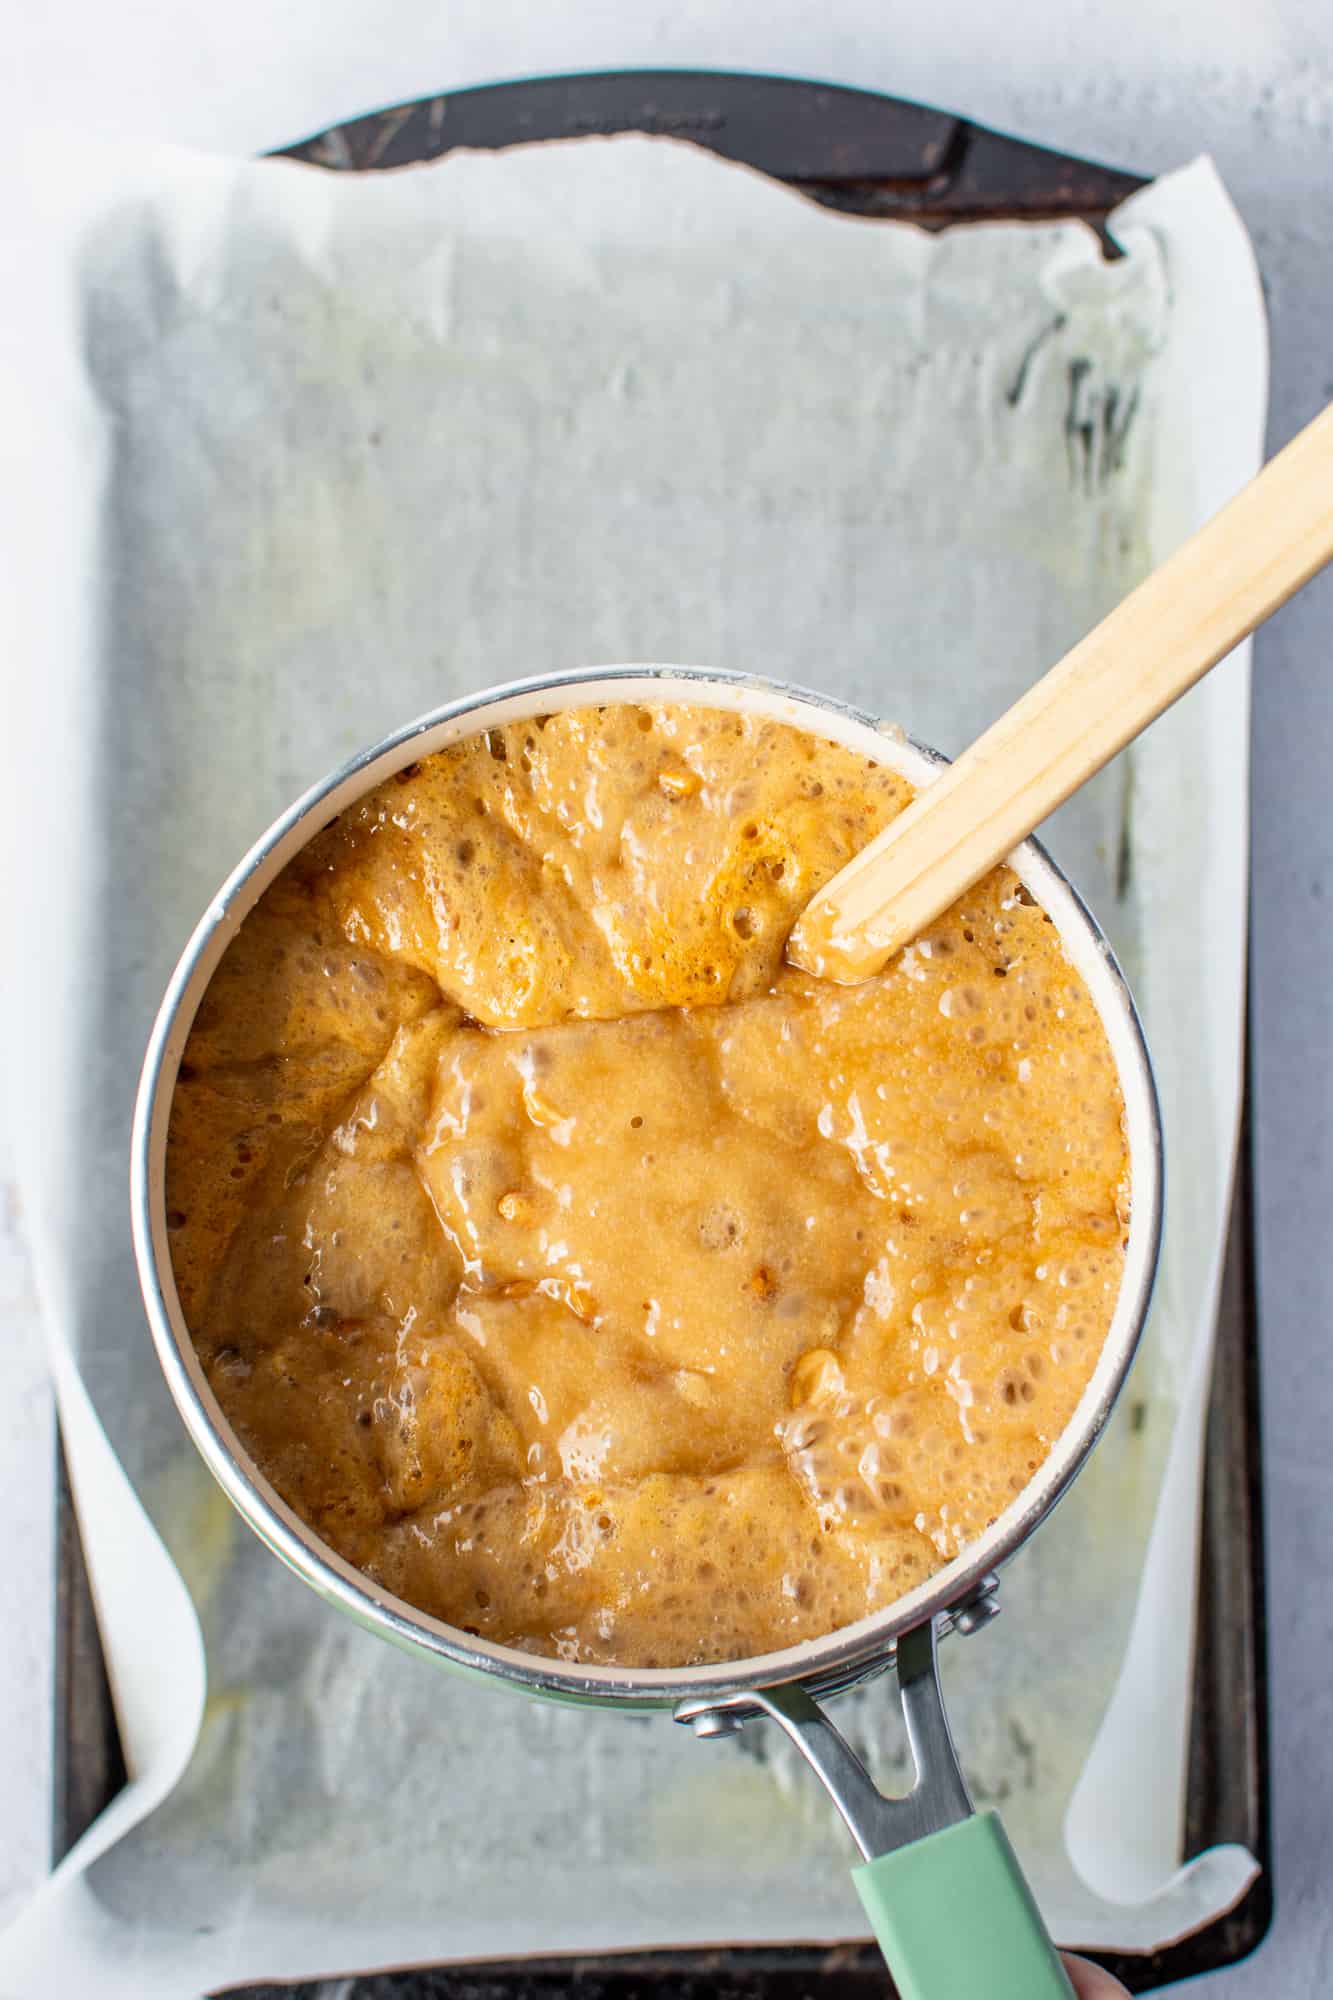 boiling peanut brittle in a liquid state in a sauce pan with a wooden spoon.